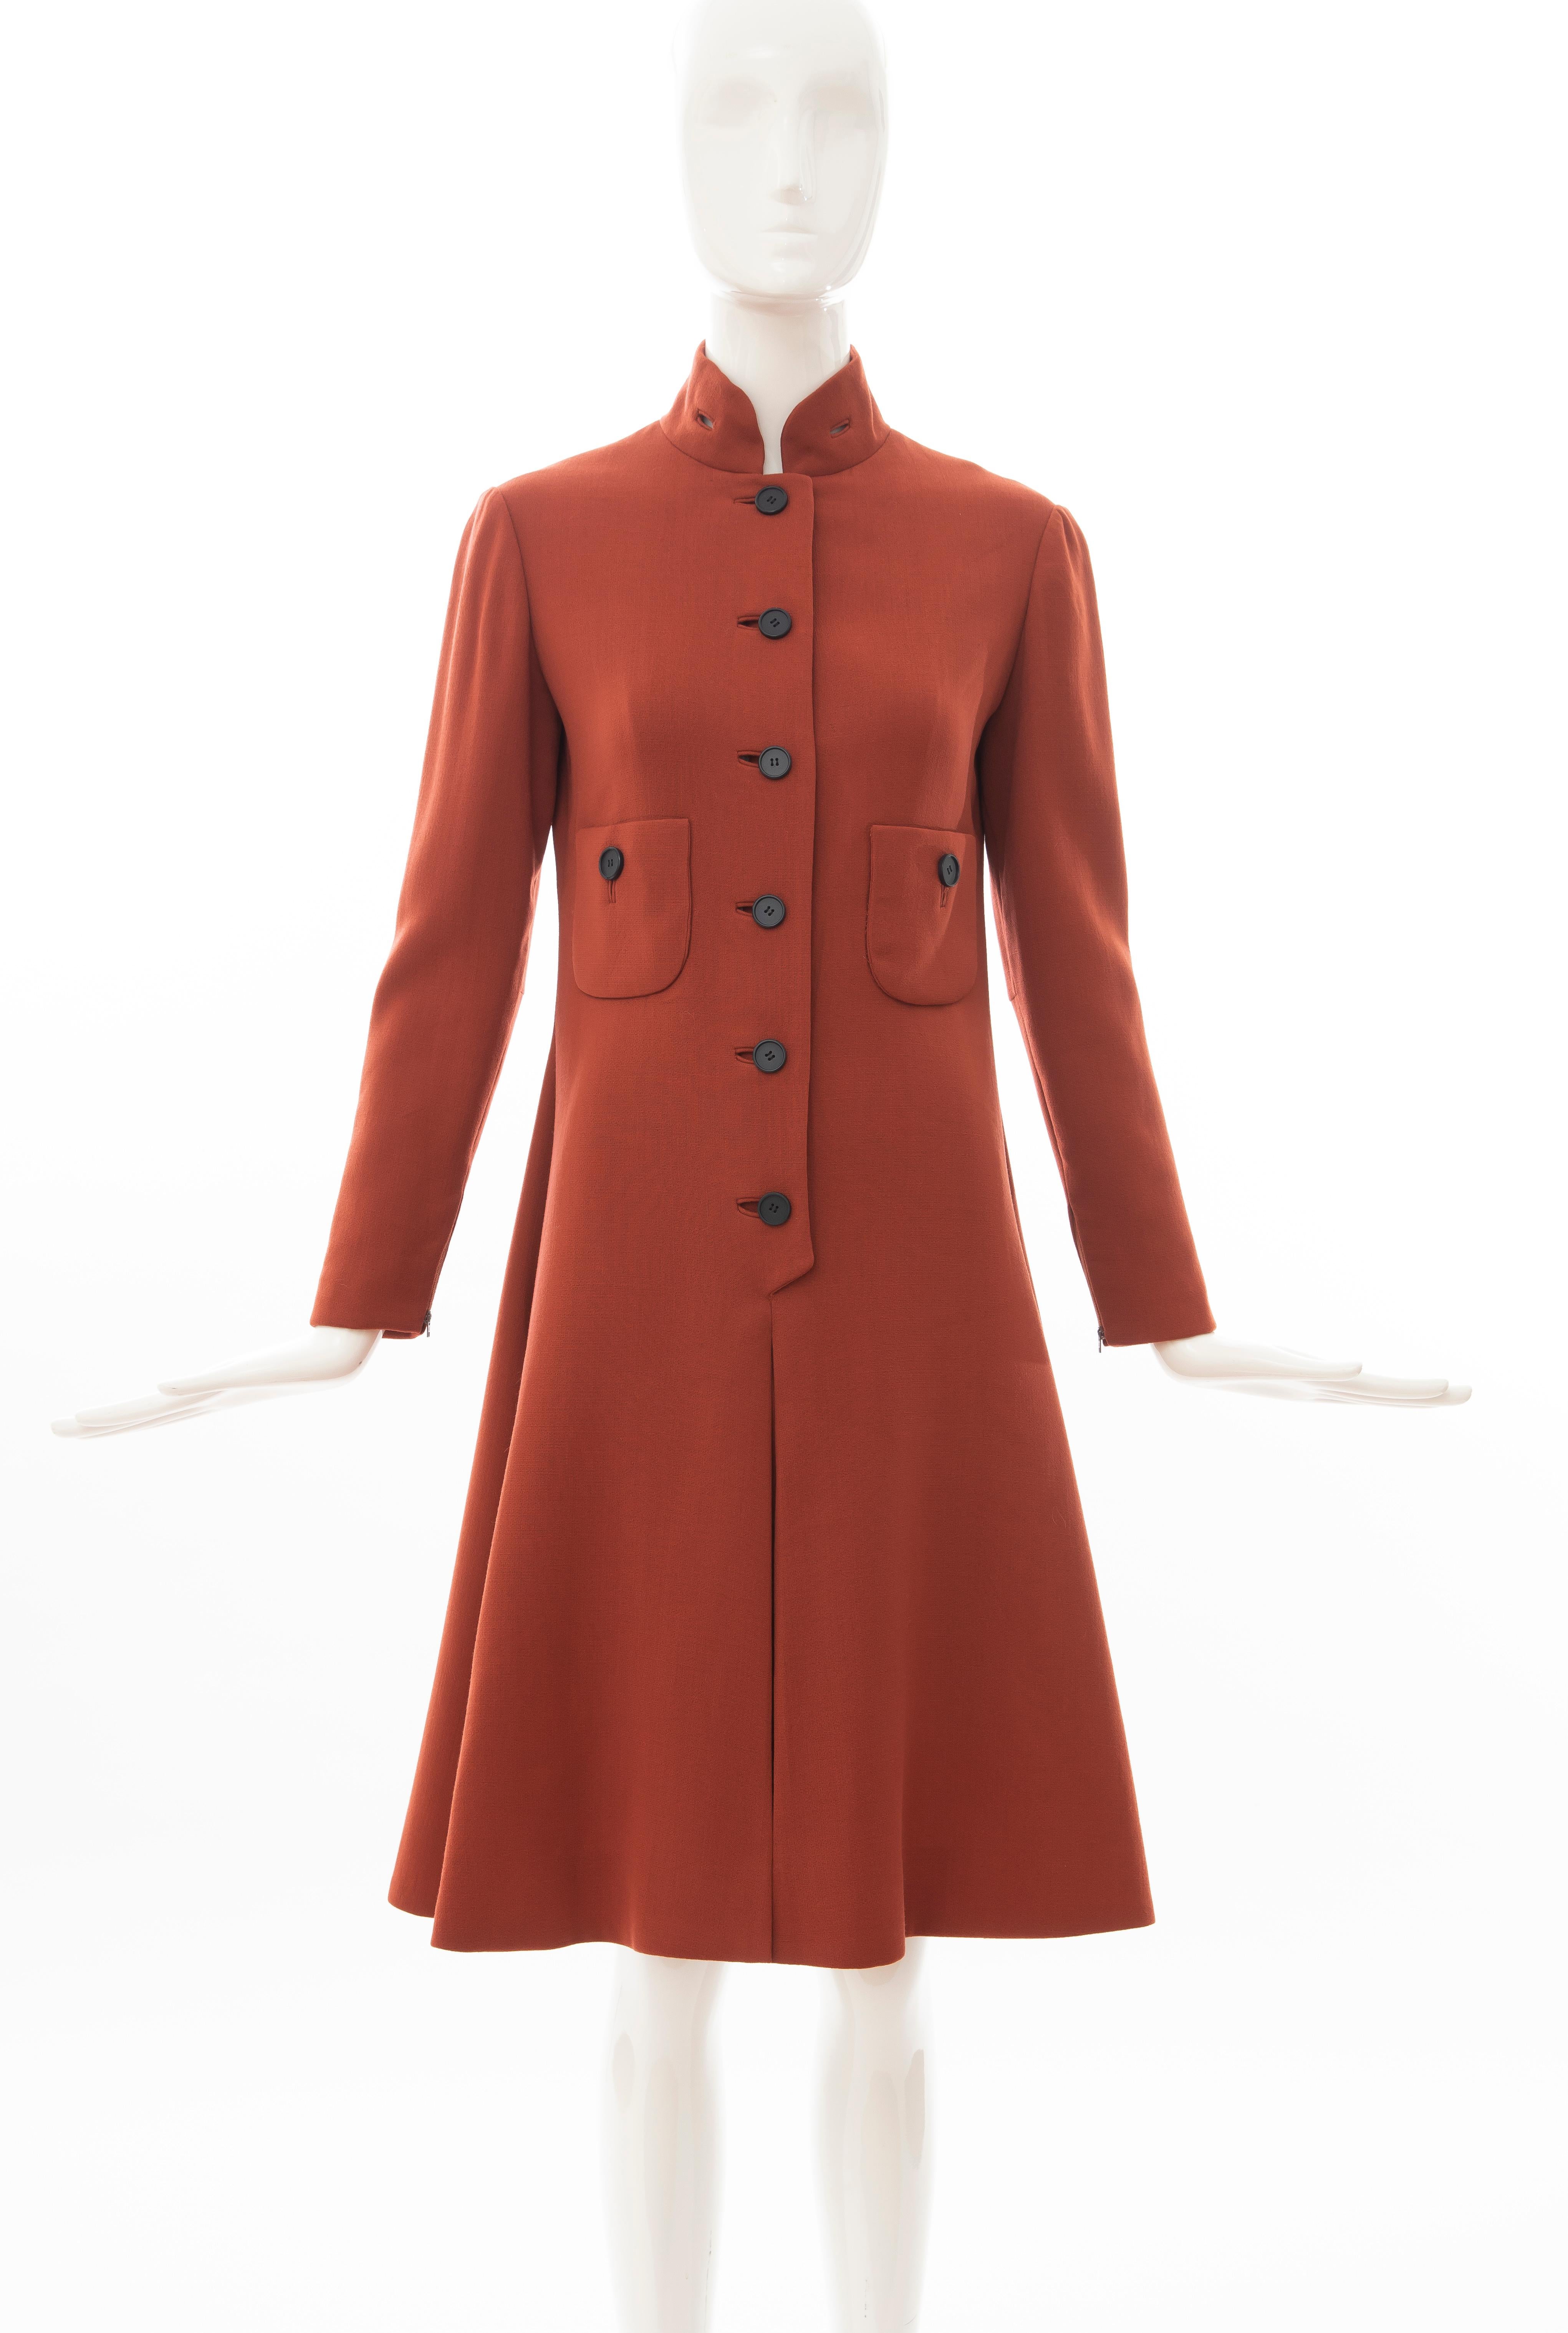 Geoffrey Beene, Circa 1960's cinnamon wool crepe princess style button front dress, nehru collar, two front pockets, long fitted sleeves with zipper closure and box pleated skirt.

No Size Label:
Bust: 32, Waist: 29, Hip: 35, Shoulder: 15, Sleeve: